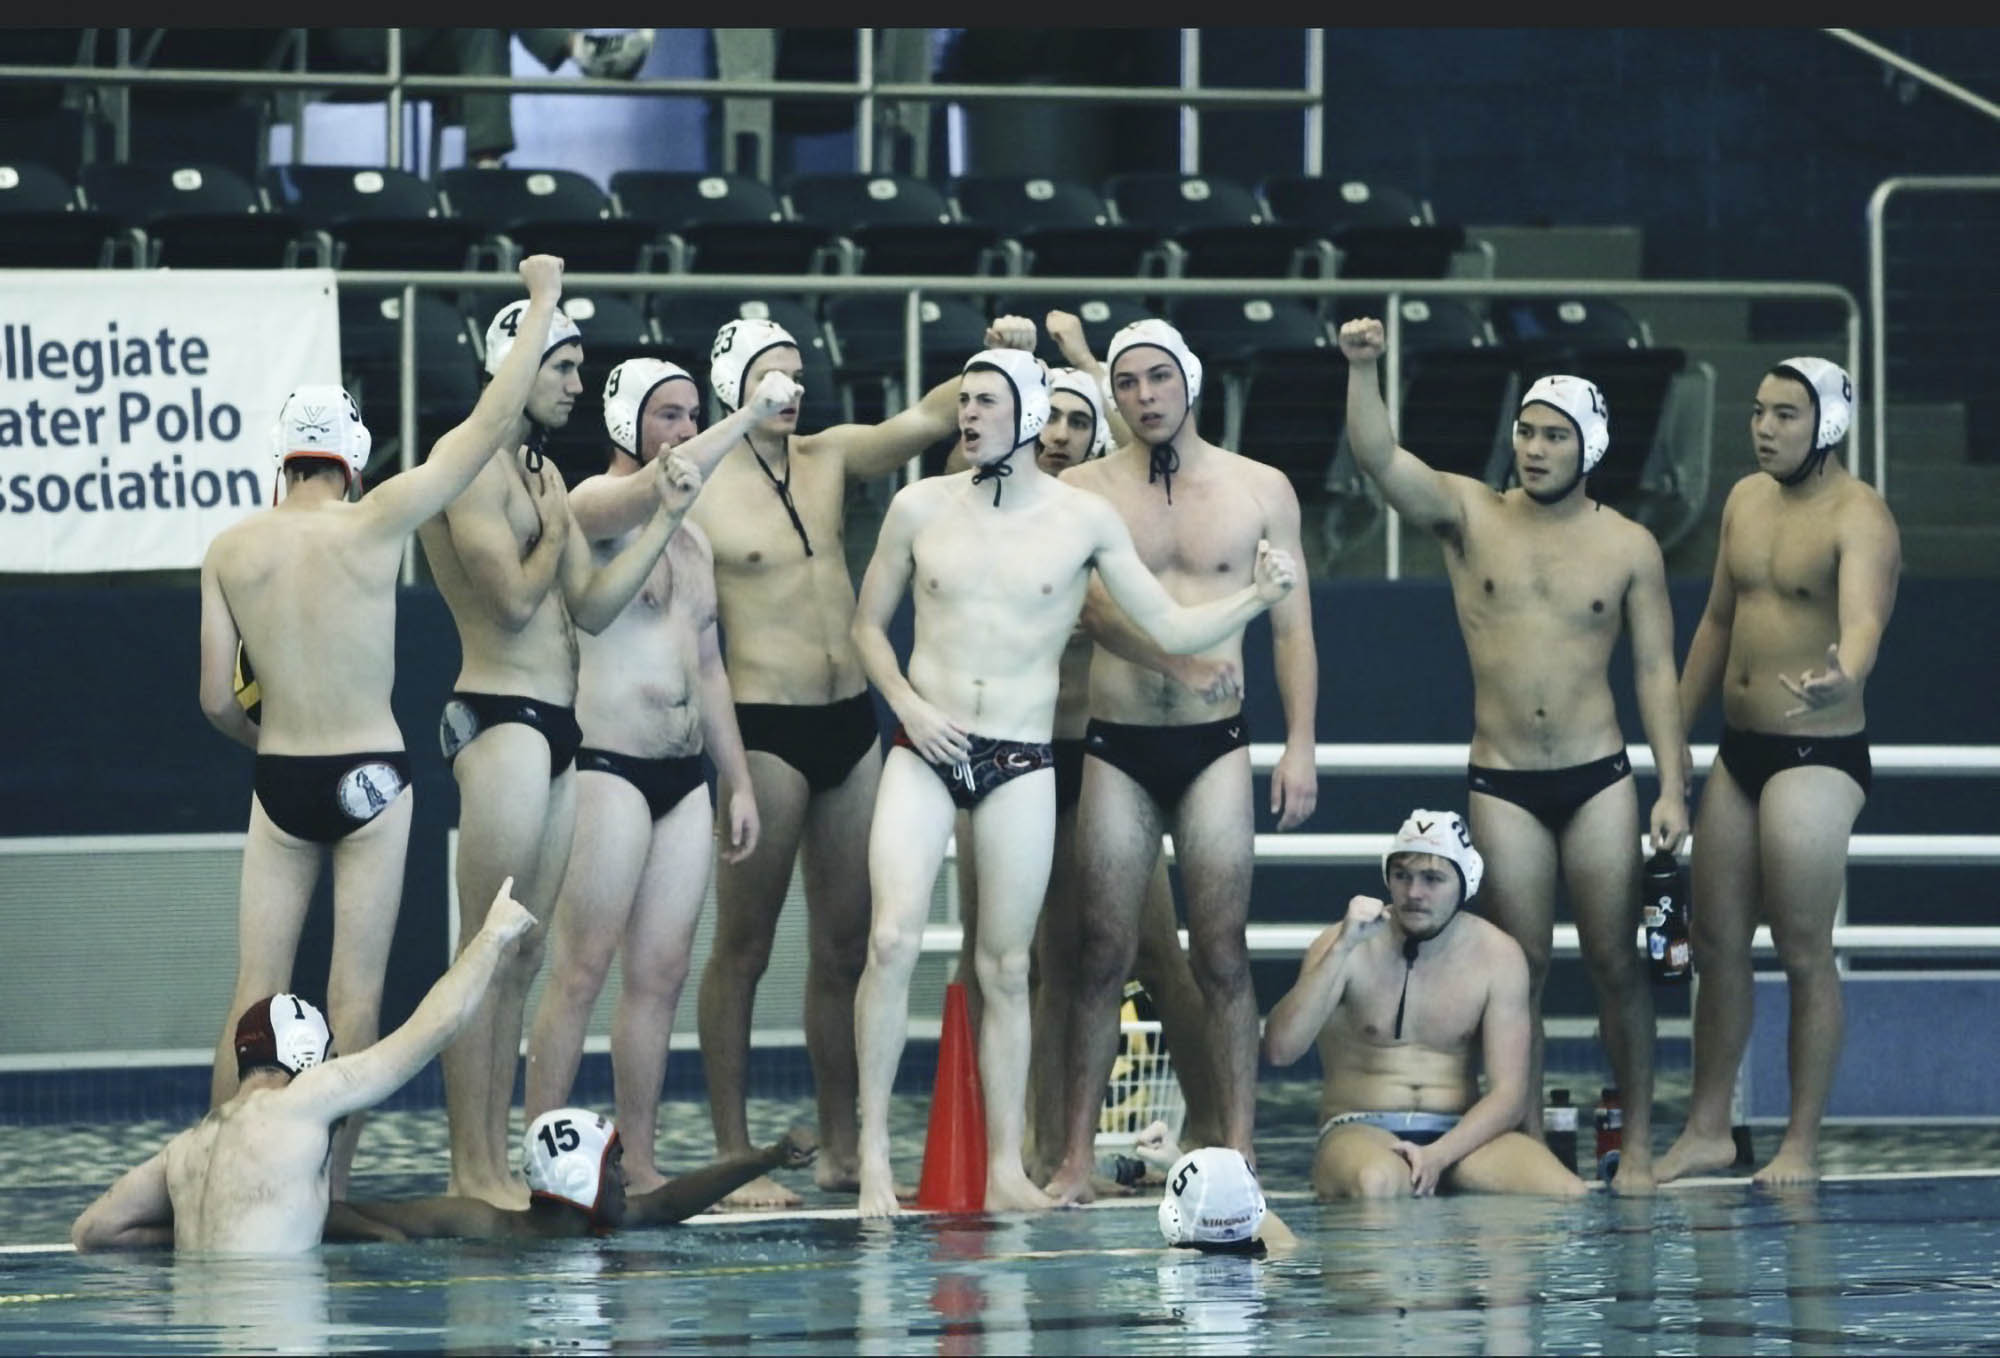 Mens Polo Team Celebrating a win  by the pool